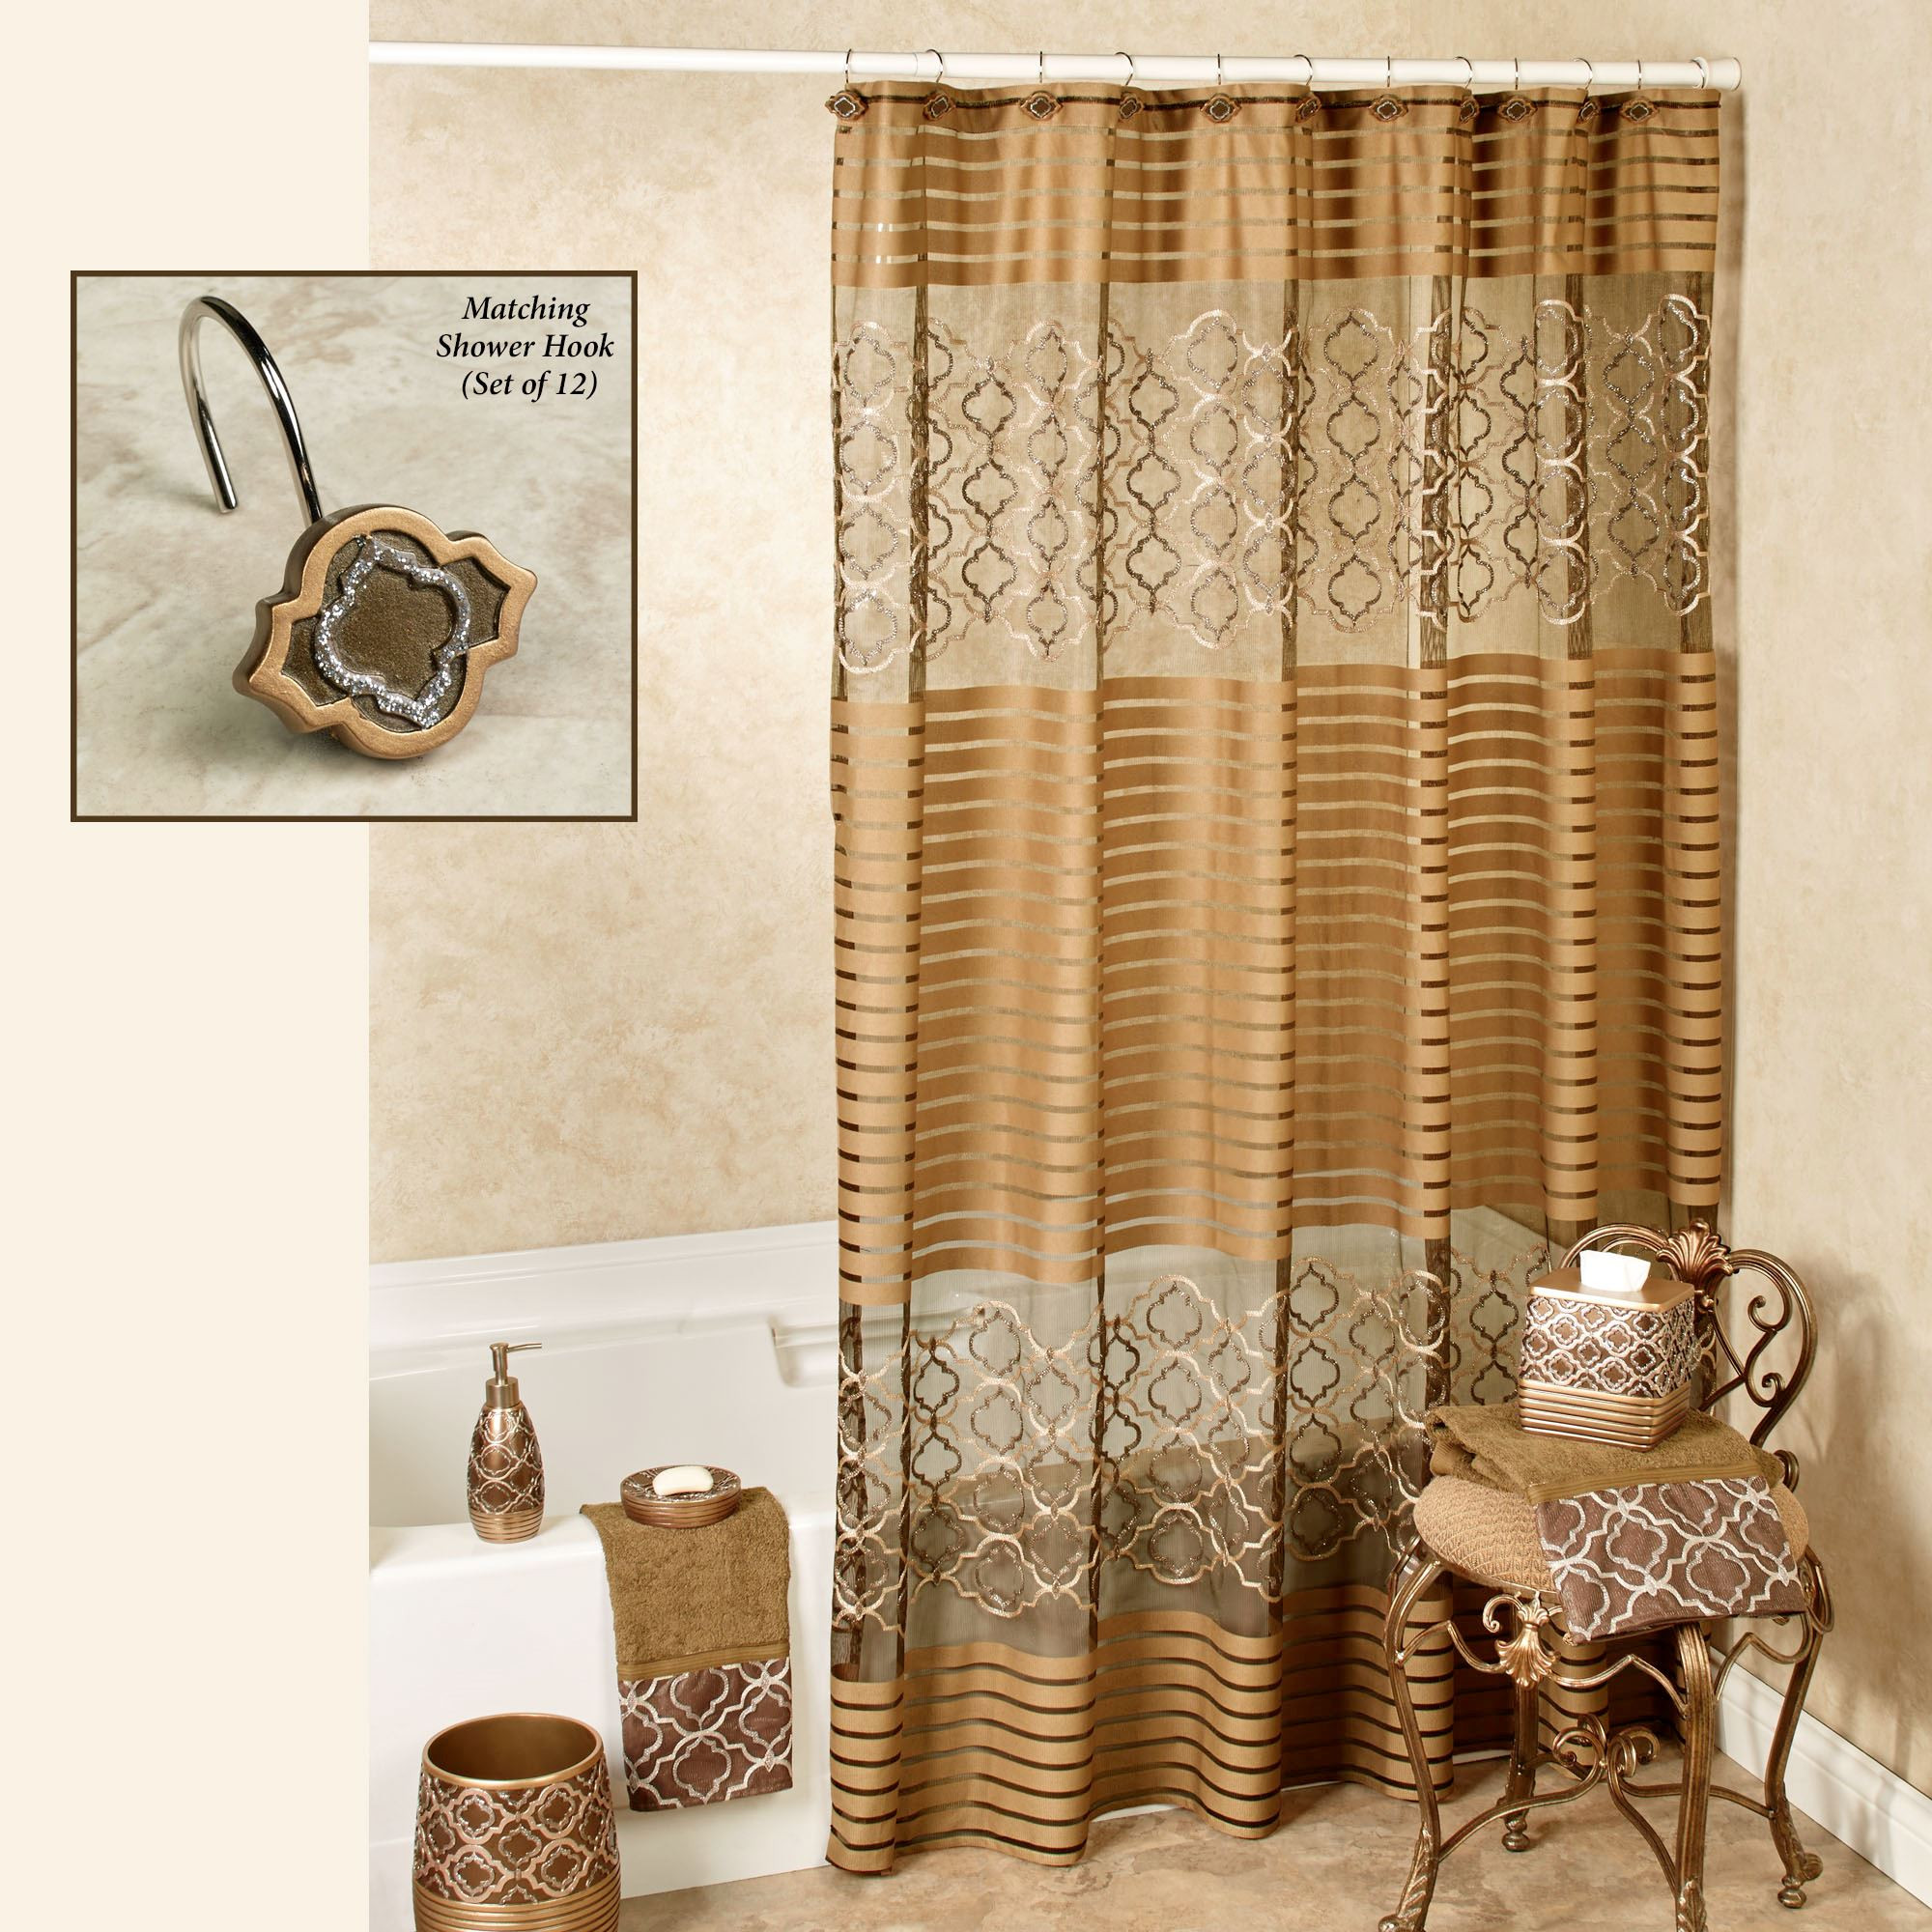 Bathroom Sets With Shower Curtain
 Spindle Embroidered Medallion Shower Curtain